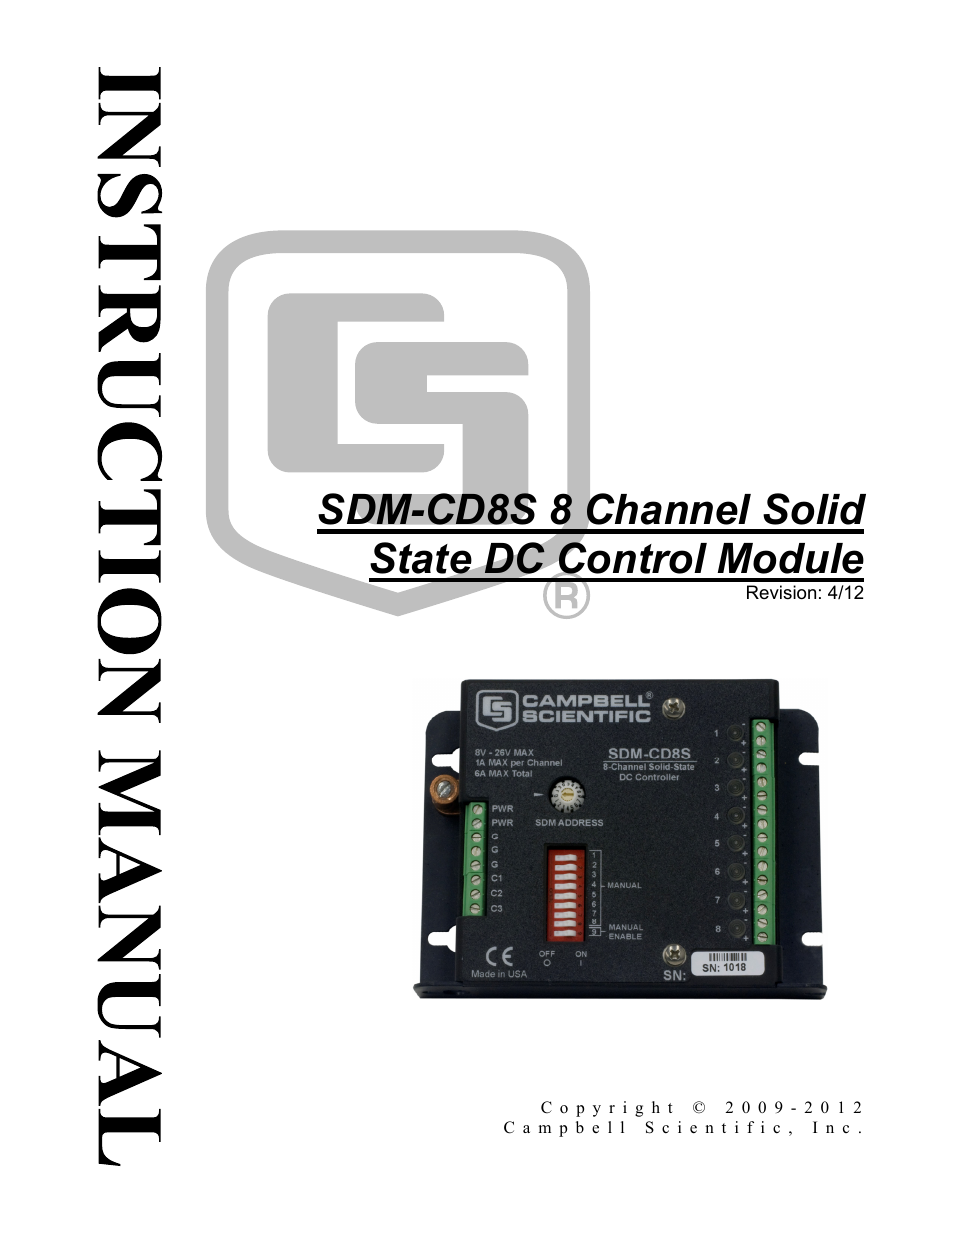 SDM-CD8S 8 Channel Solid State DC Control Module